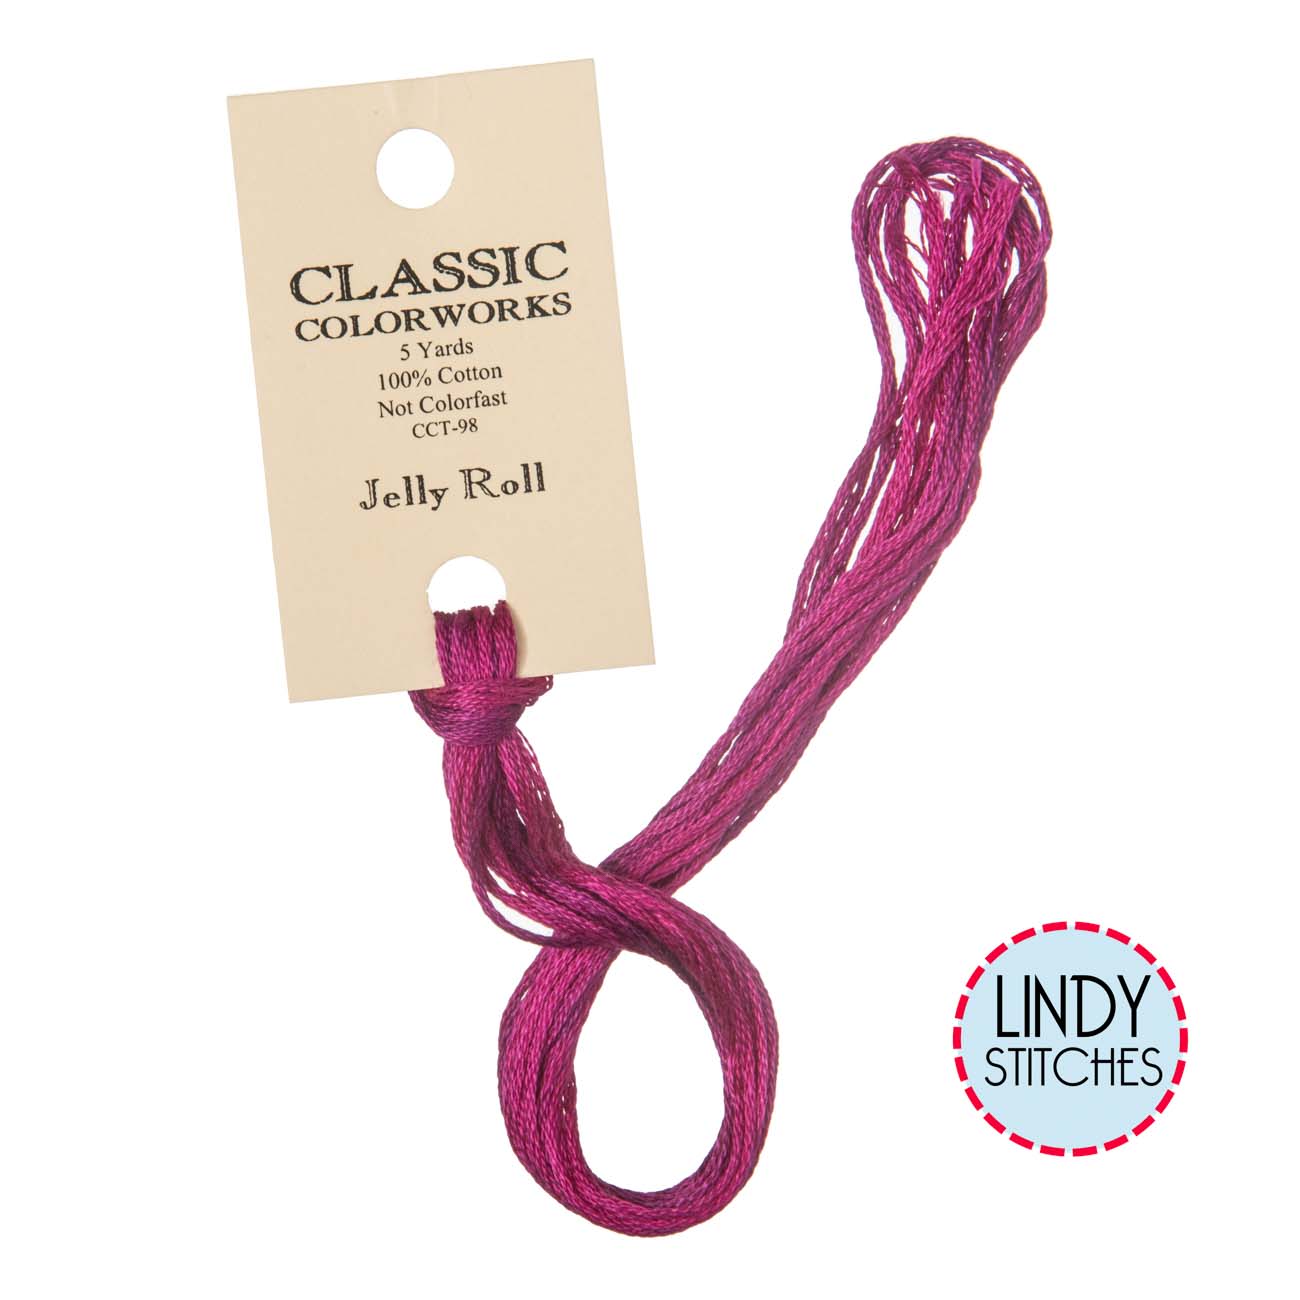 Jelly Roll Classic Colorworks Floss Hand Dyed Cotton Skein